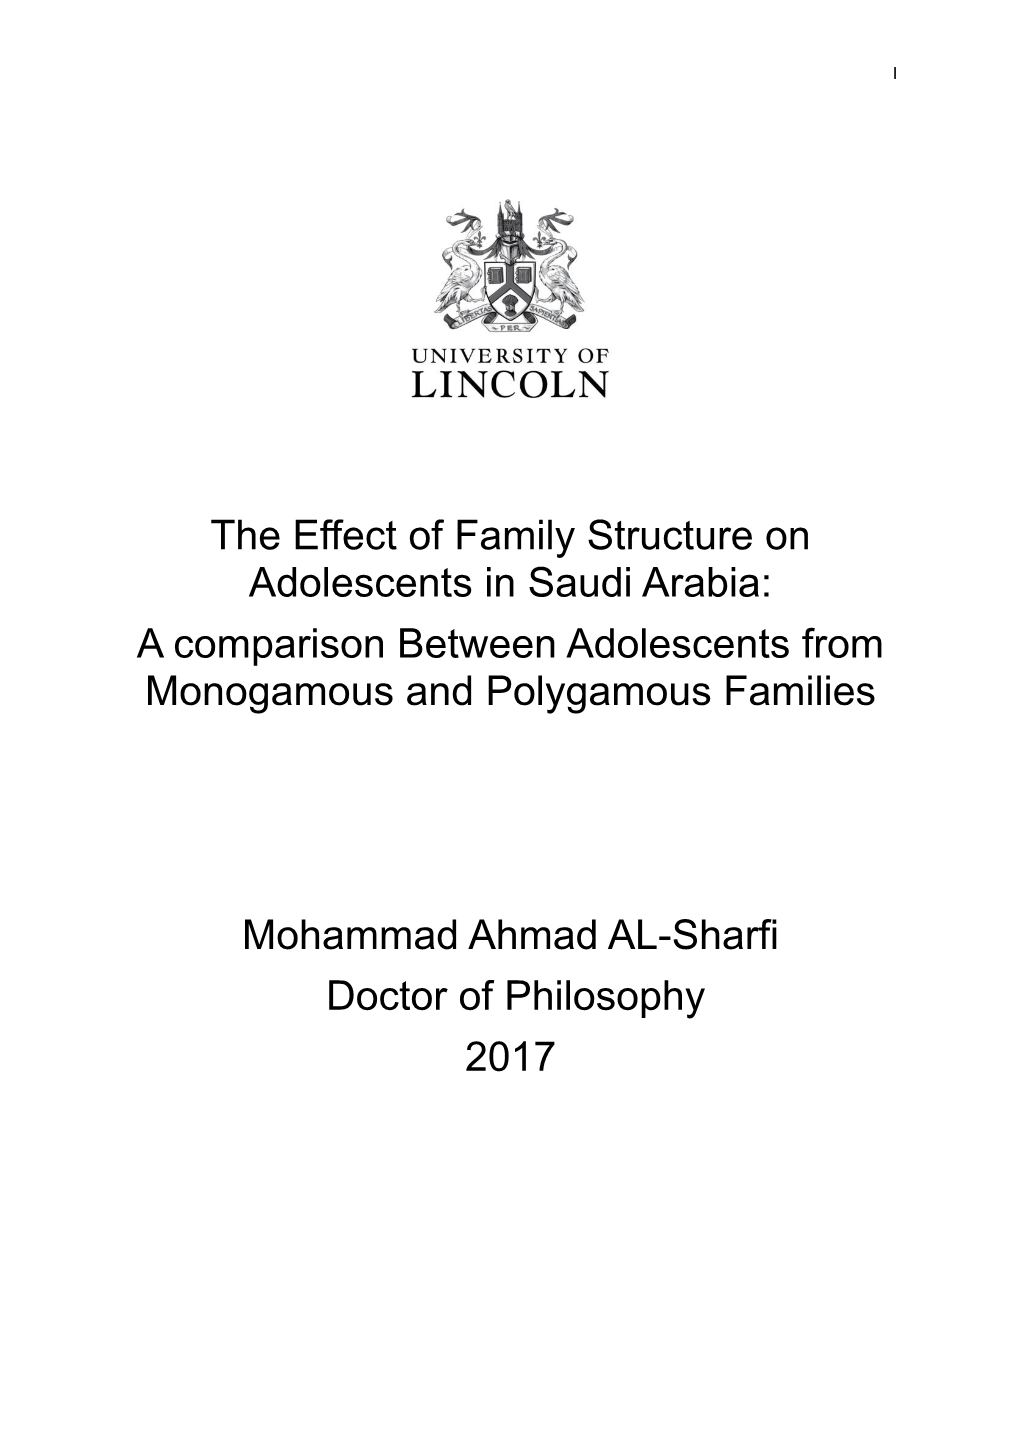 The Effect of Family Structure on Adolescents in Saudi Arabia: a Comparison Between Adolescents from Monogamous and Polygamous Families